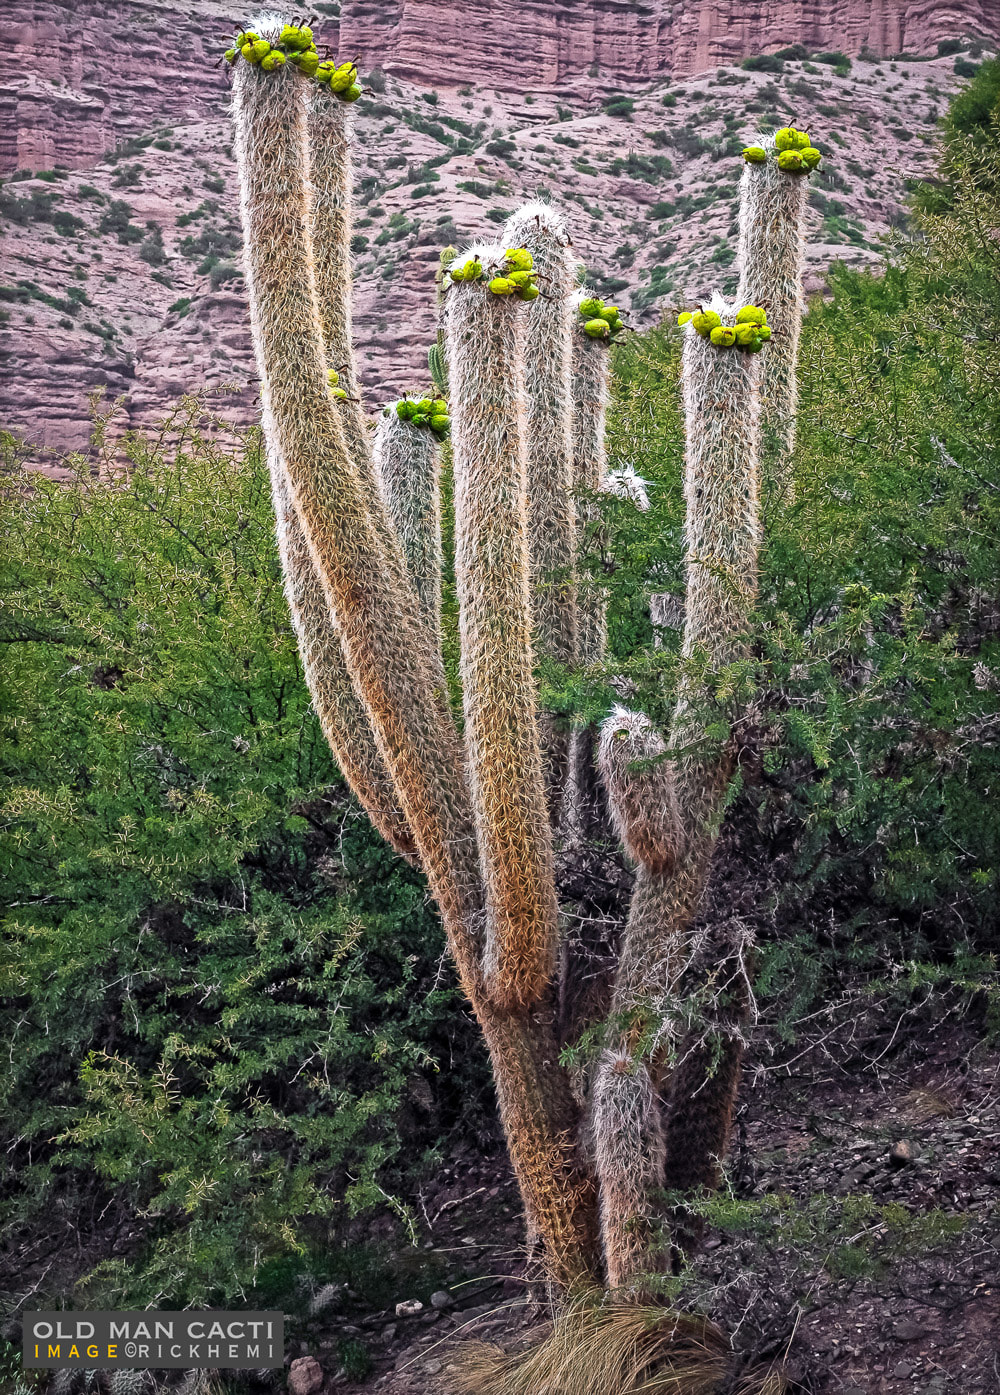 overland travel South America, old man cacti Andean region, image by Rick Hemi